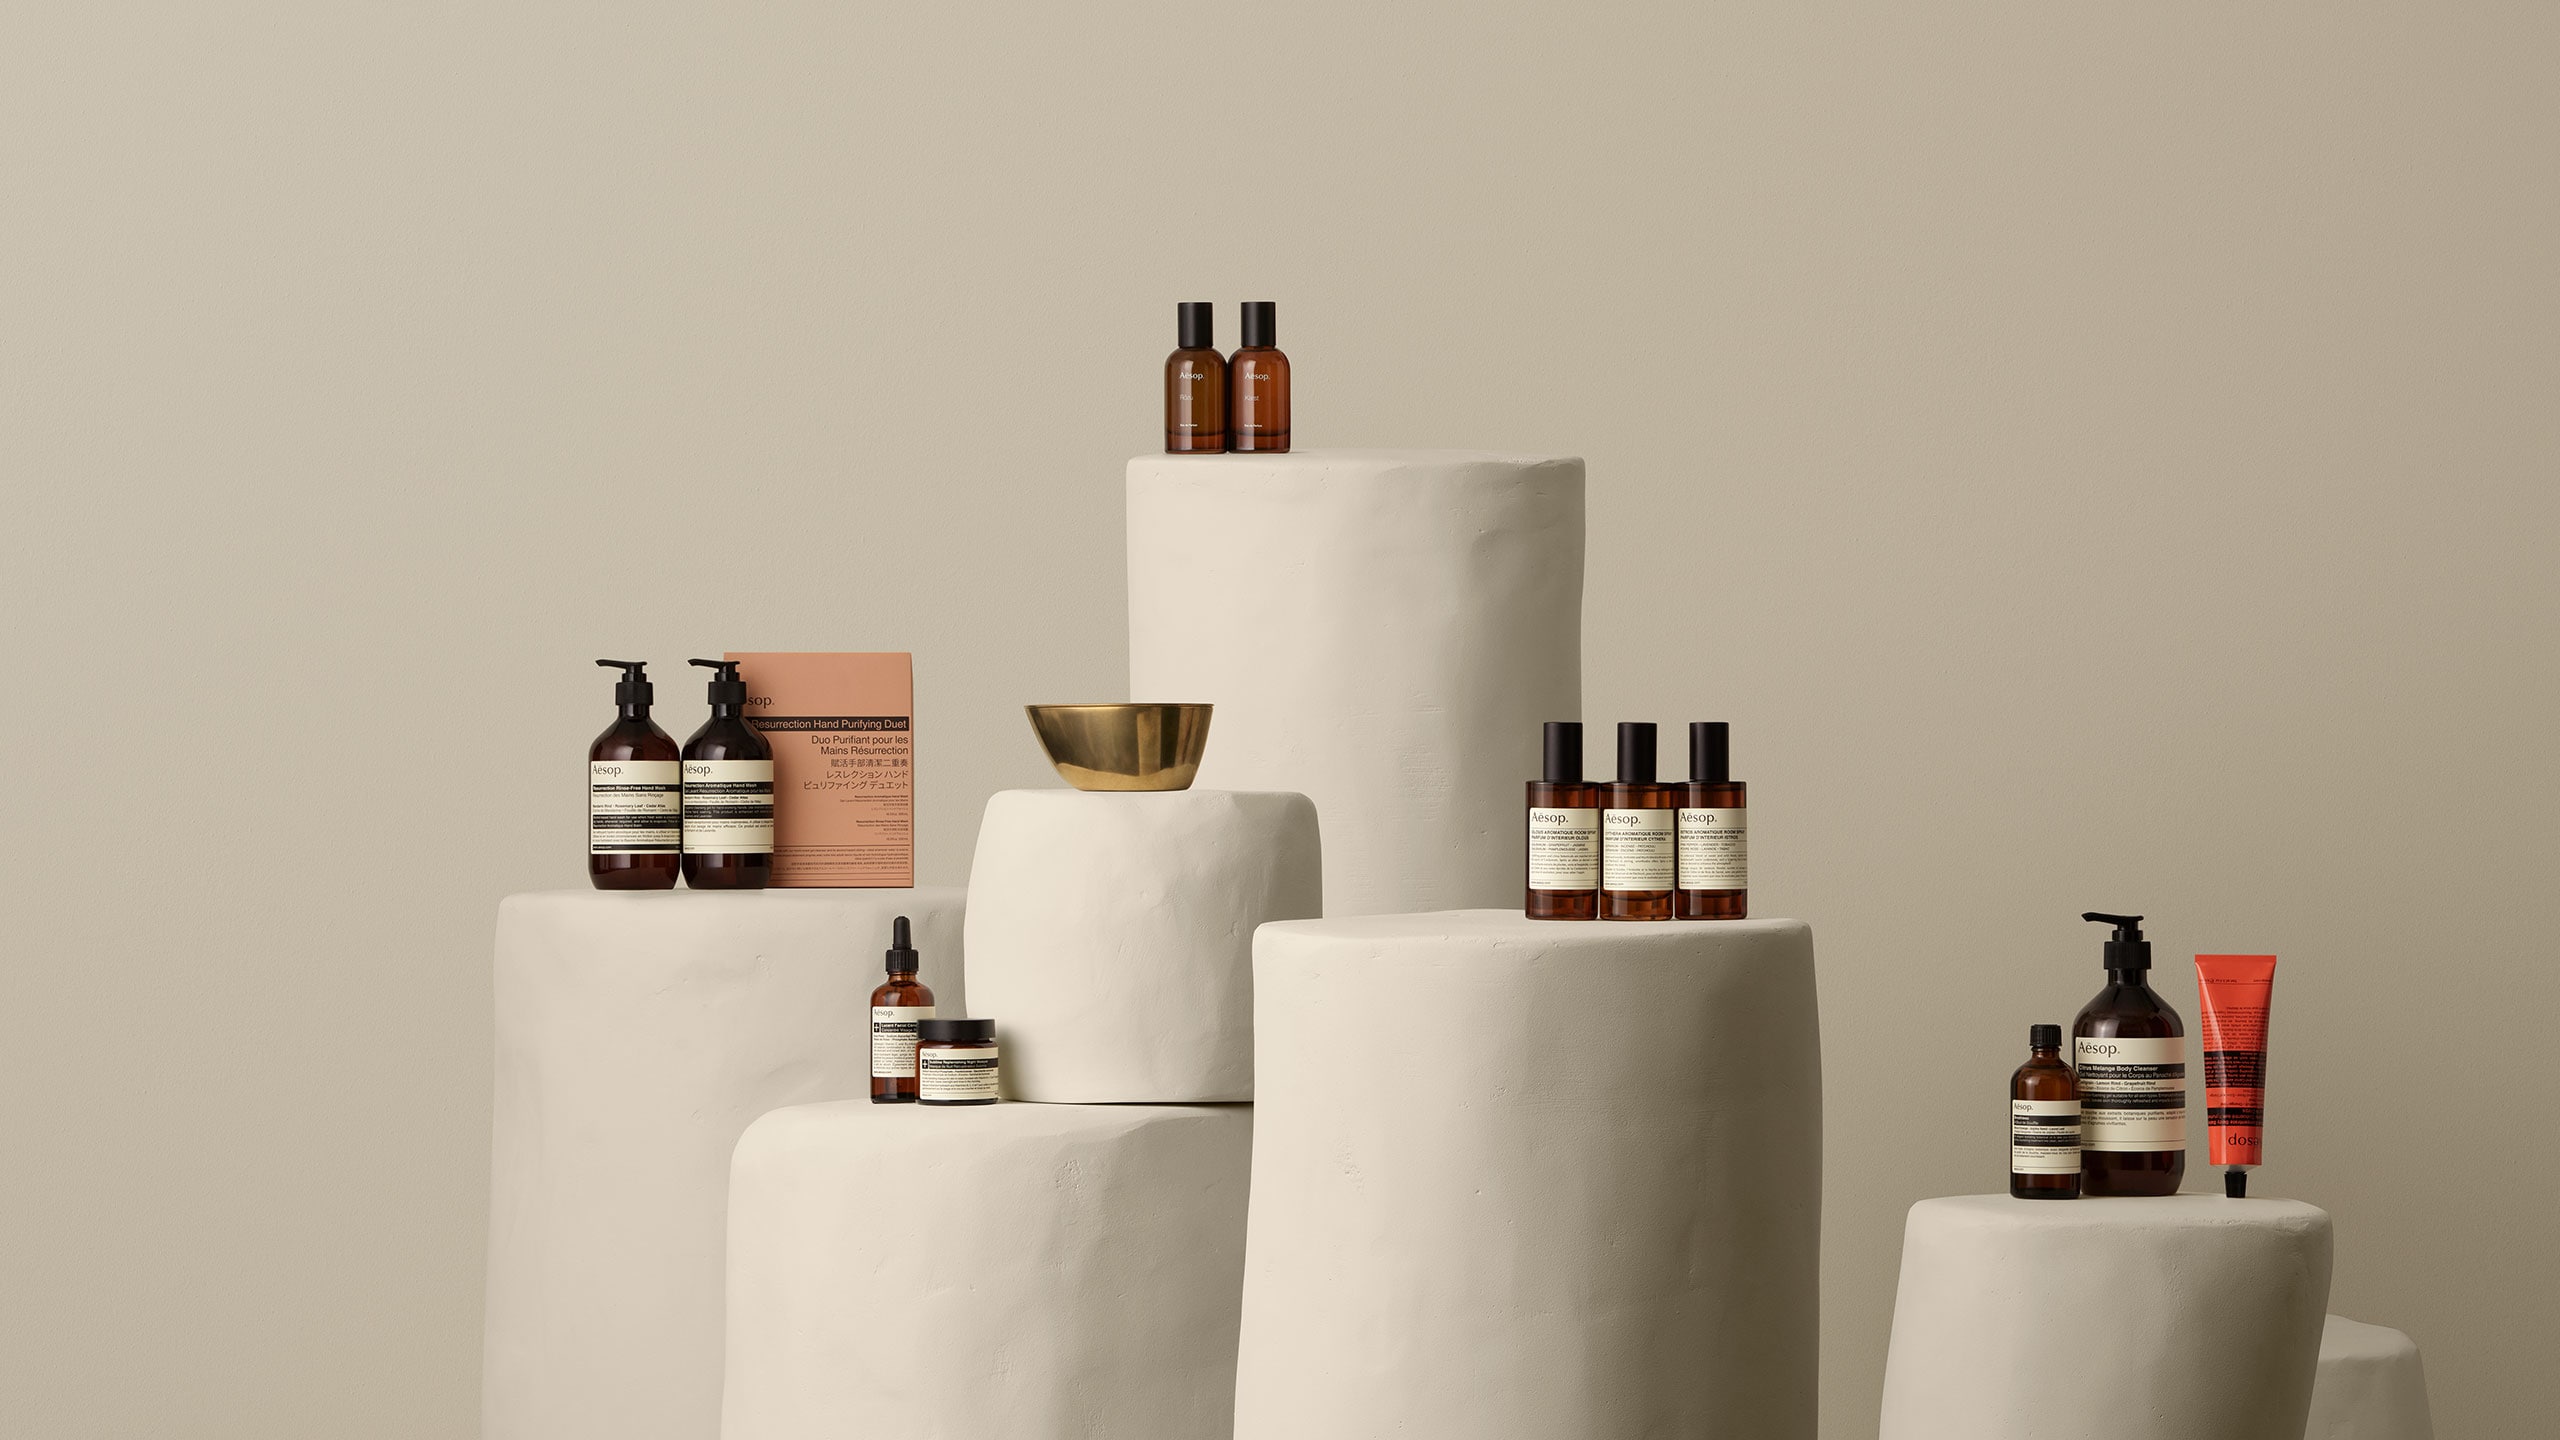 Aesop products placed on a white stone pillars